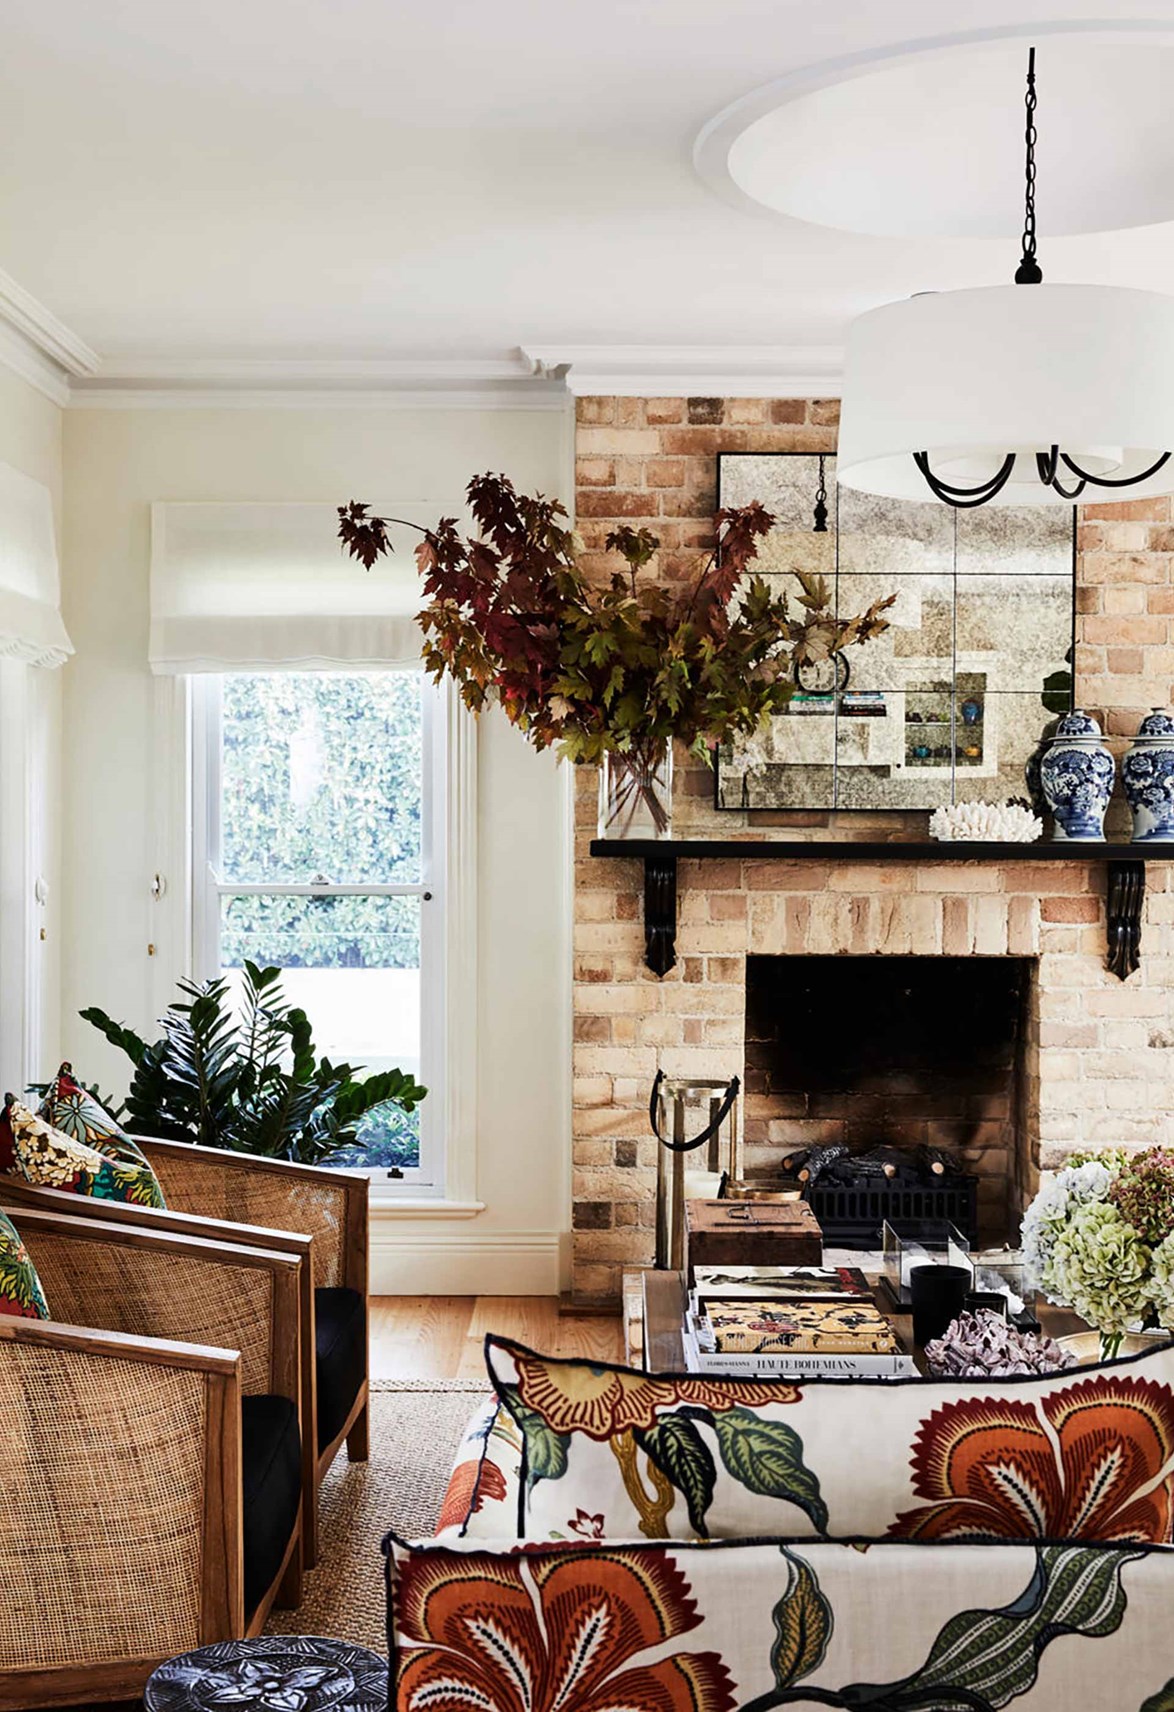 There's no question the fireplace is the star of the show in [this charming weatherboard cottage](https://www.homestolove.com.au/charming-weatherboard-cottage-in-berry-20329|target="_blank"). Scale is everything here, as the rattan tub chairs tie into stone textures and the simple mantle is a stage for styling simple vignettes. The antiqued mirror refects more stone in the wall opposite.